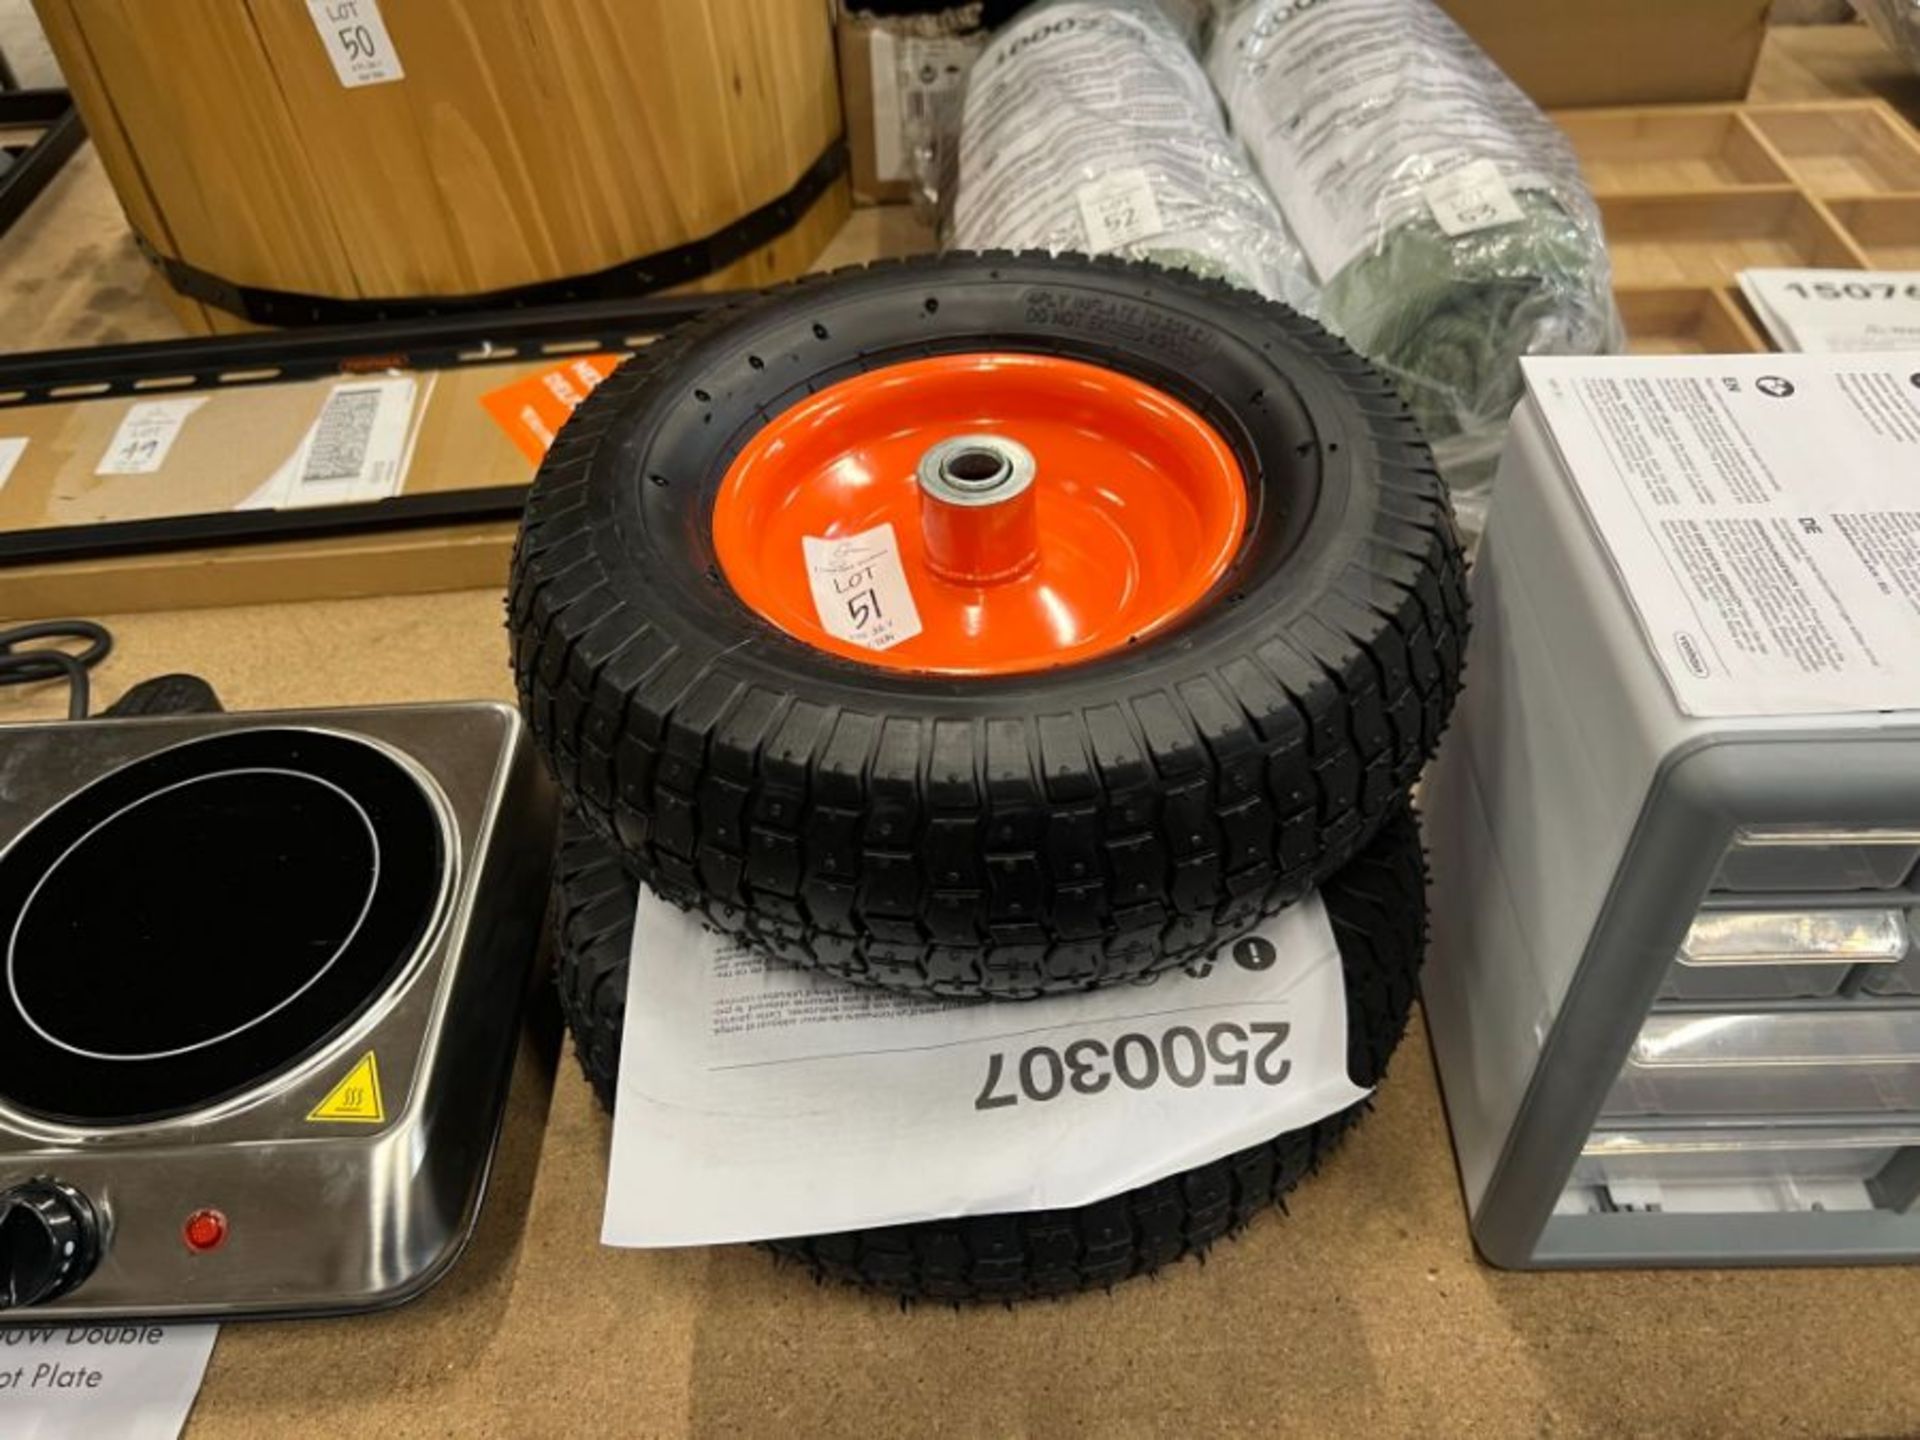 PAIR OF 13" SPARE PNEUMATIC WHEELS (NEW)